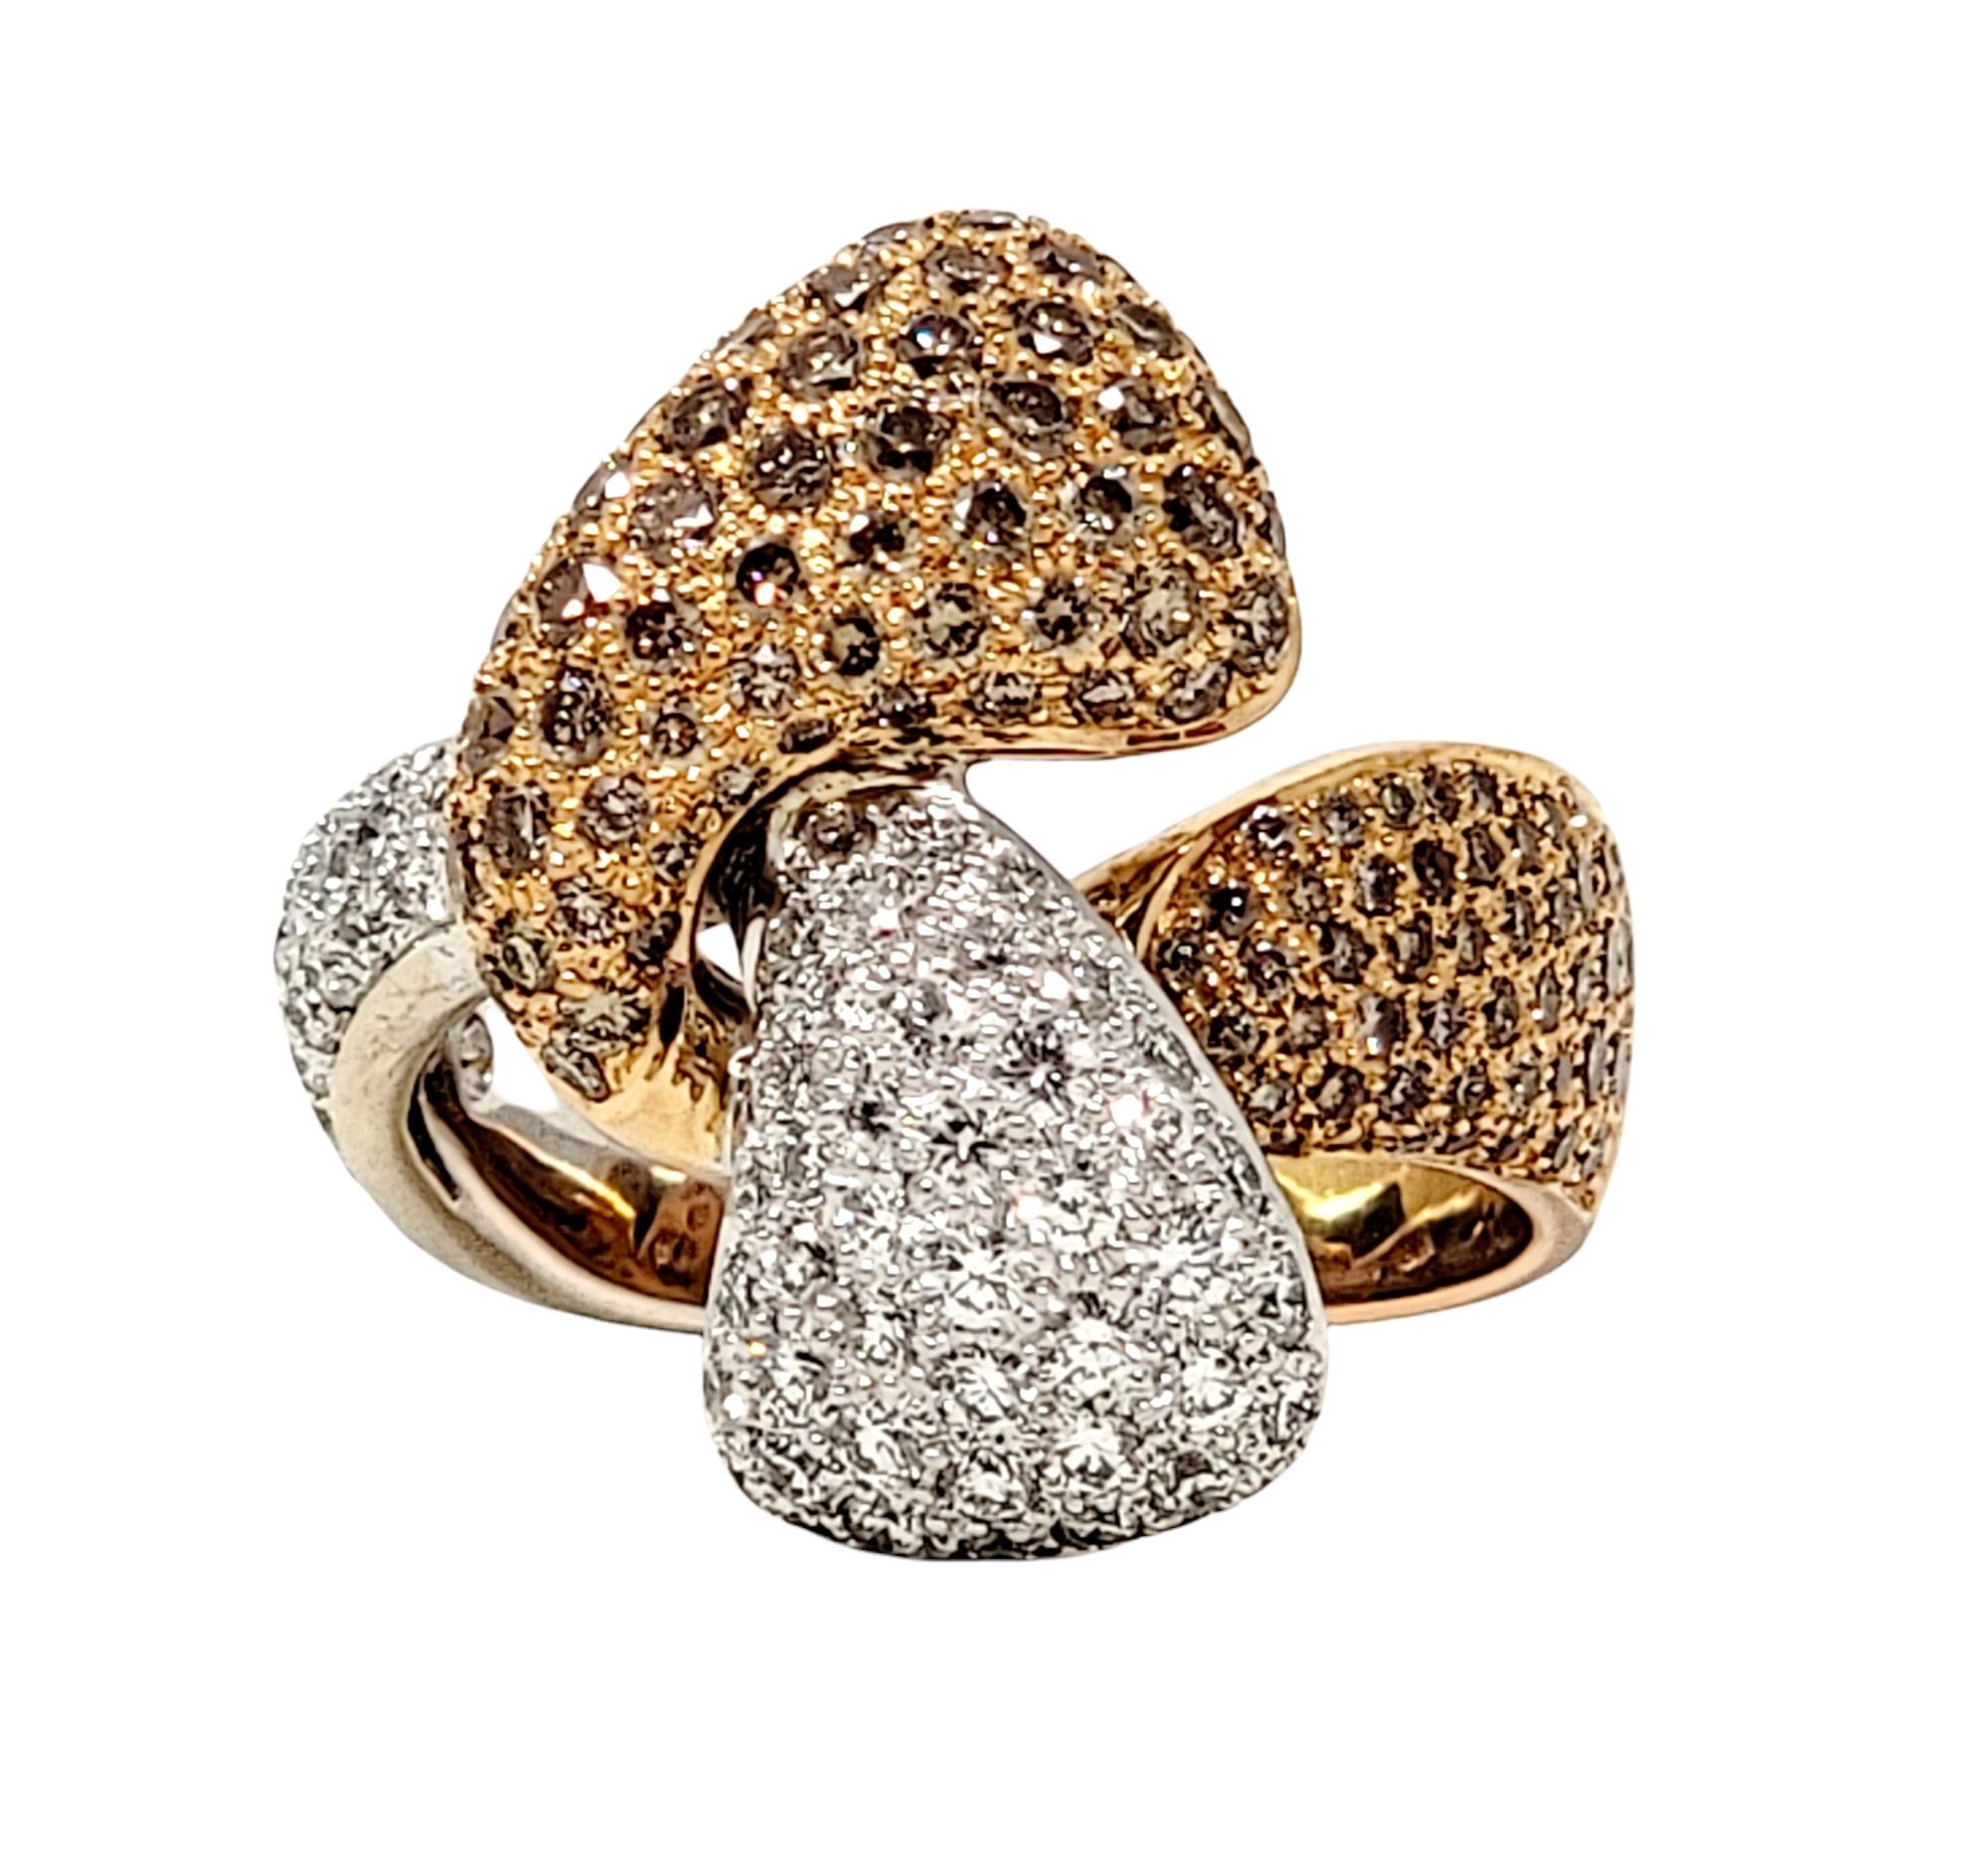 Ring size: 7.75

This absolutely stunning Hans D. Kreiger cocktail ring features a gorgeous combination of fancy brown and white pave diamonds in a contemporary twisted bypass design. 2.01 carats of natural diamonds sparkle beautifully and make this